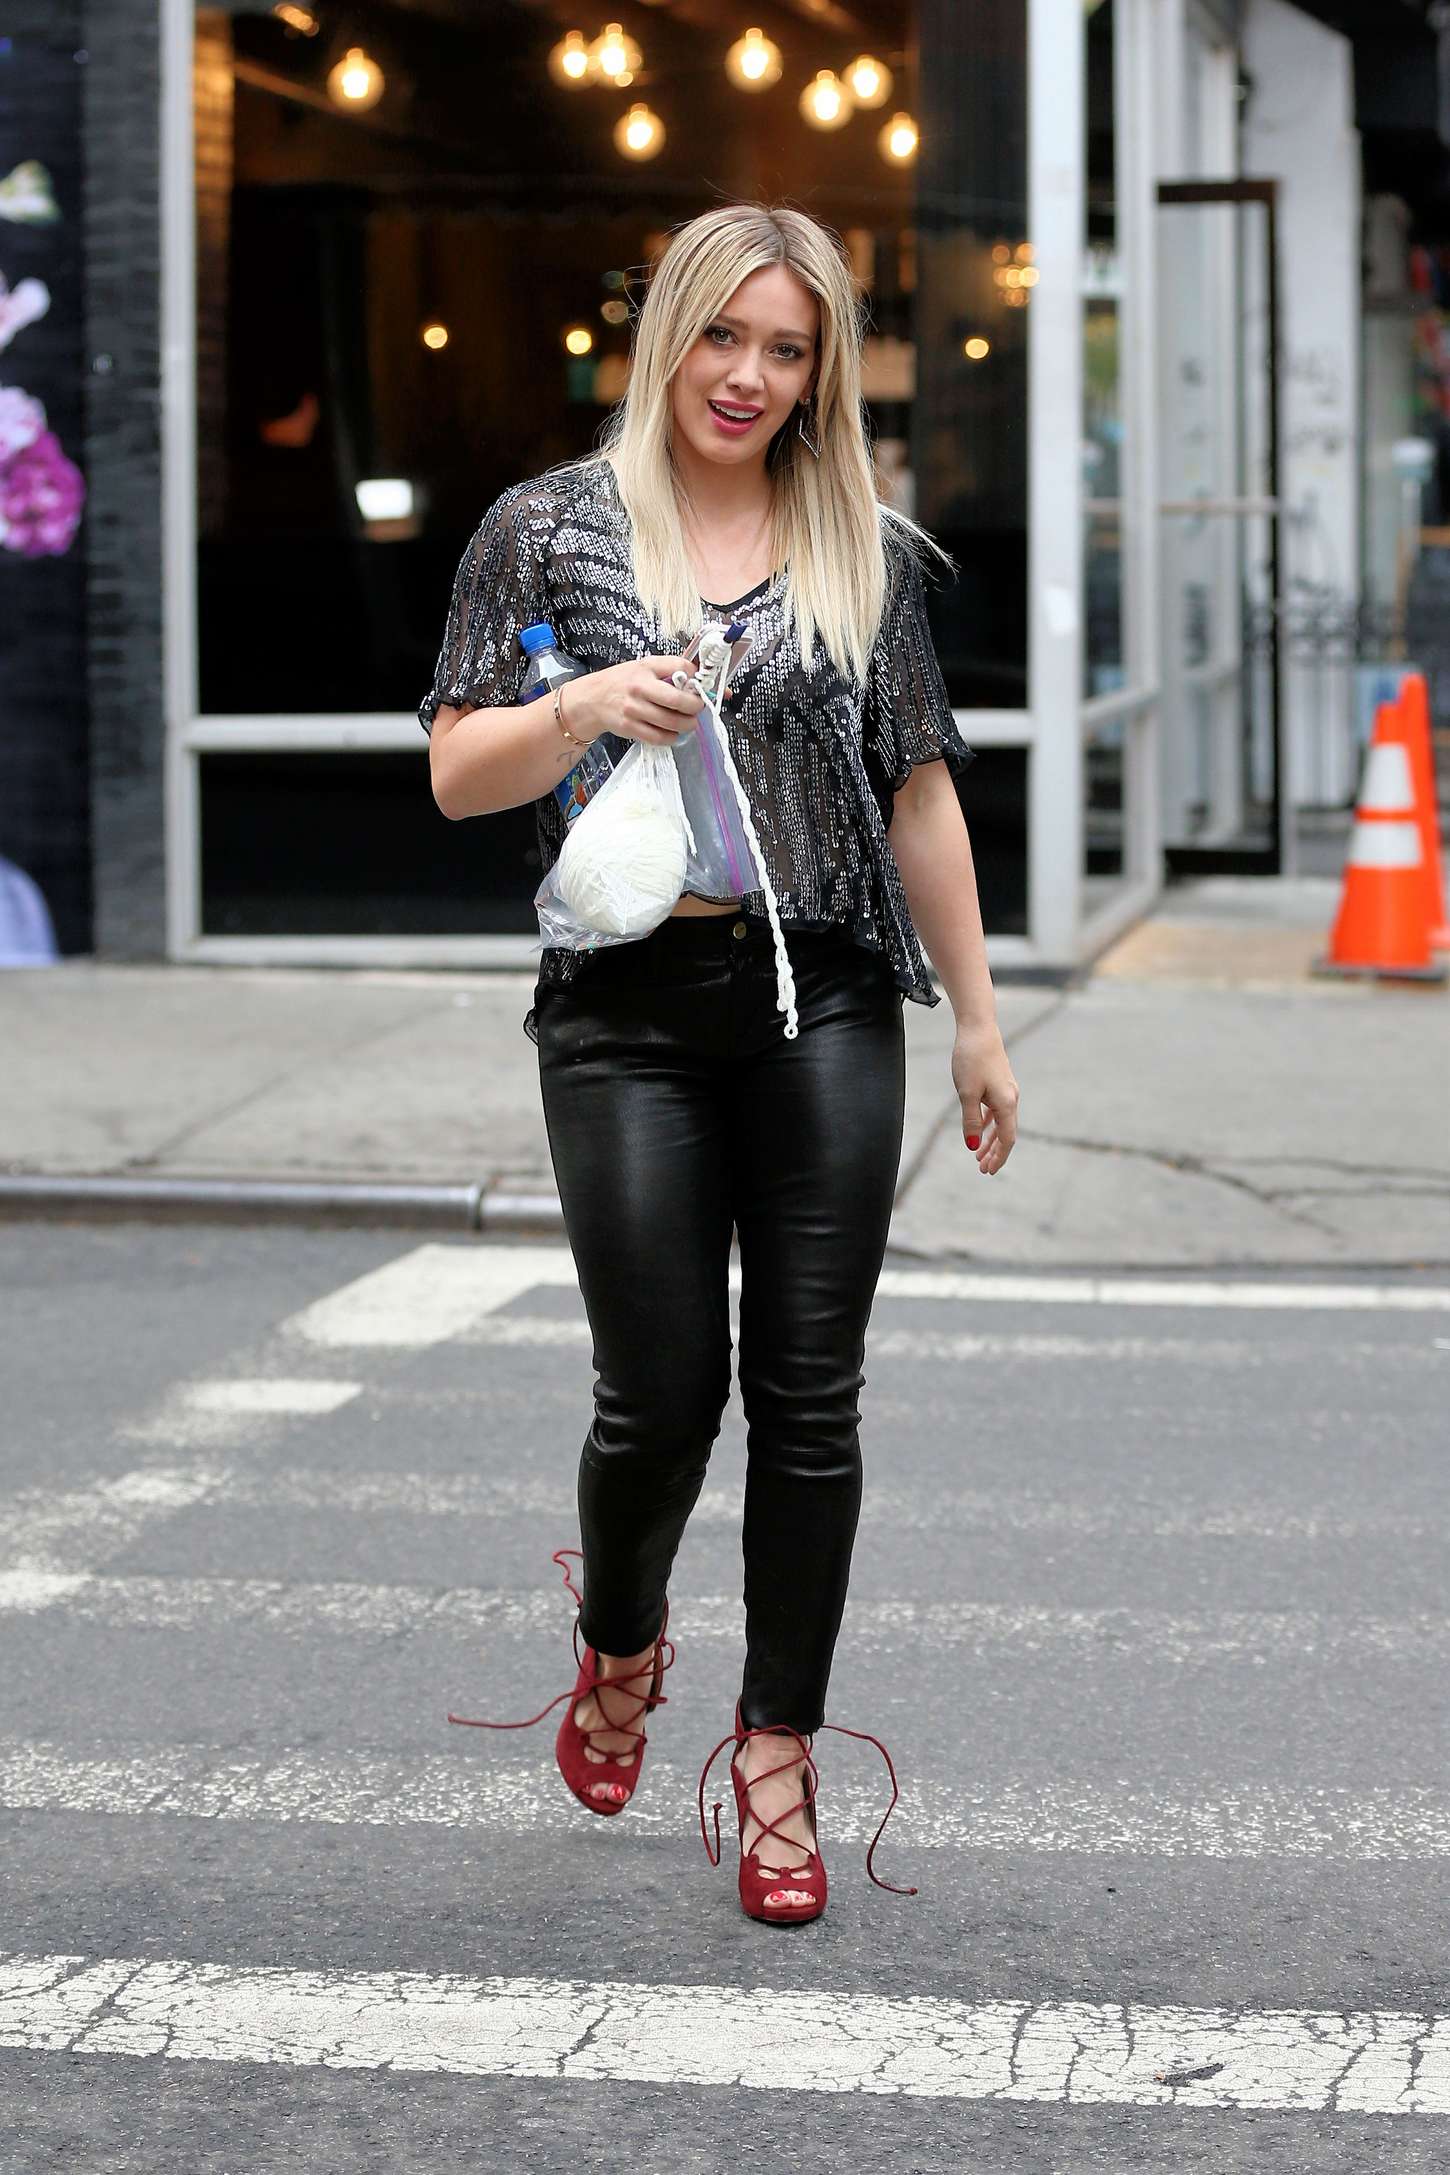 Hilary Duff 2015 : Hilary Duff in Leather Pants on Younger set -10